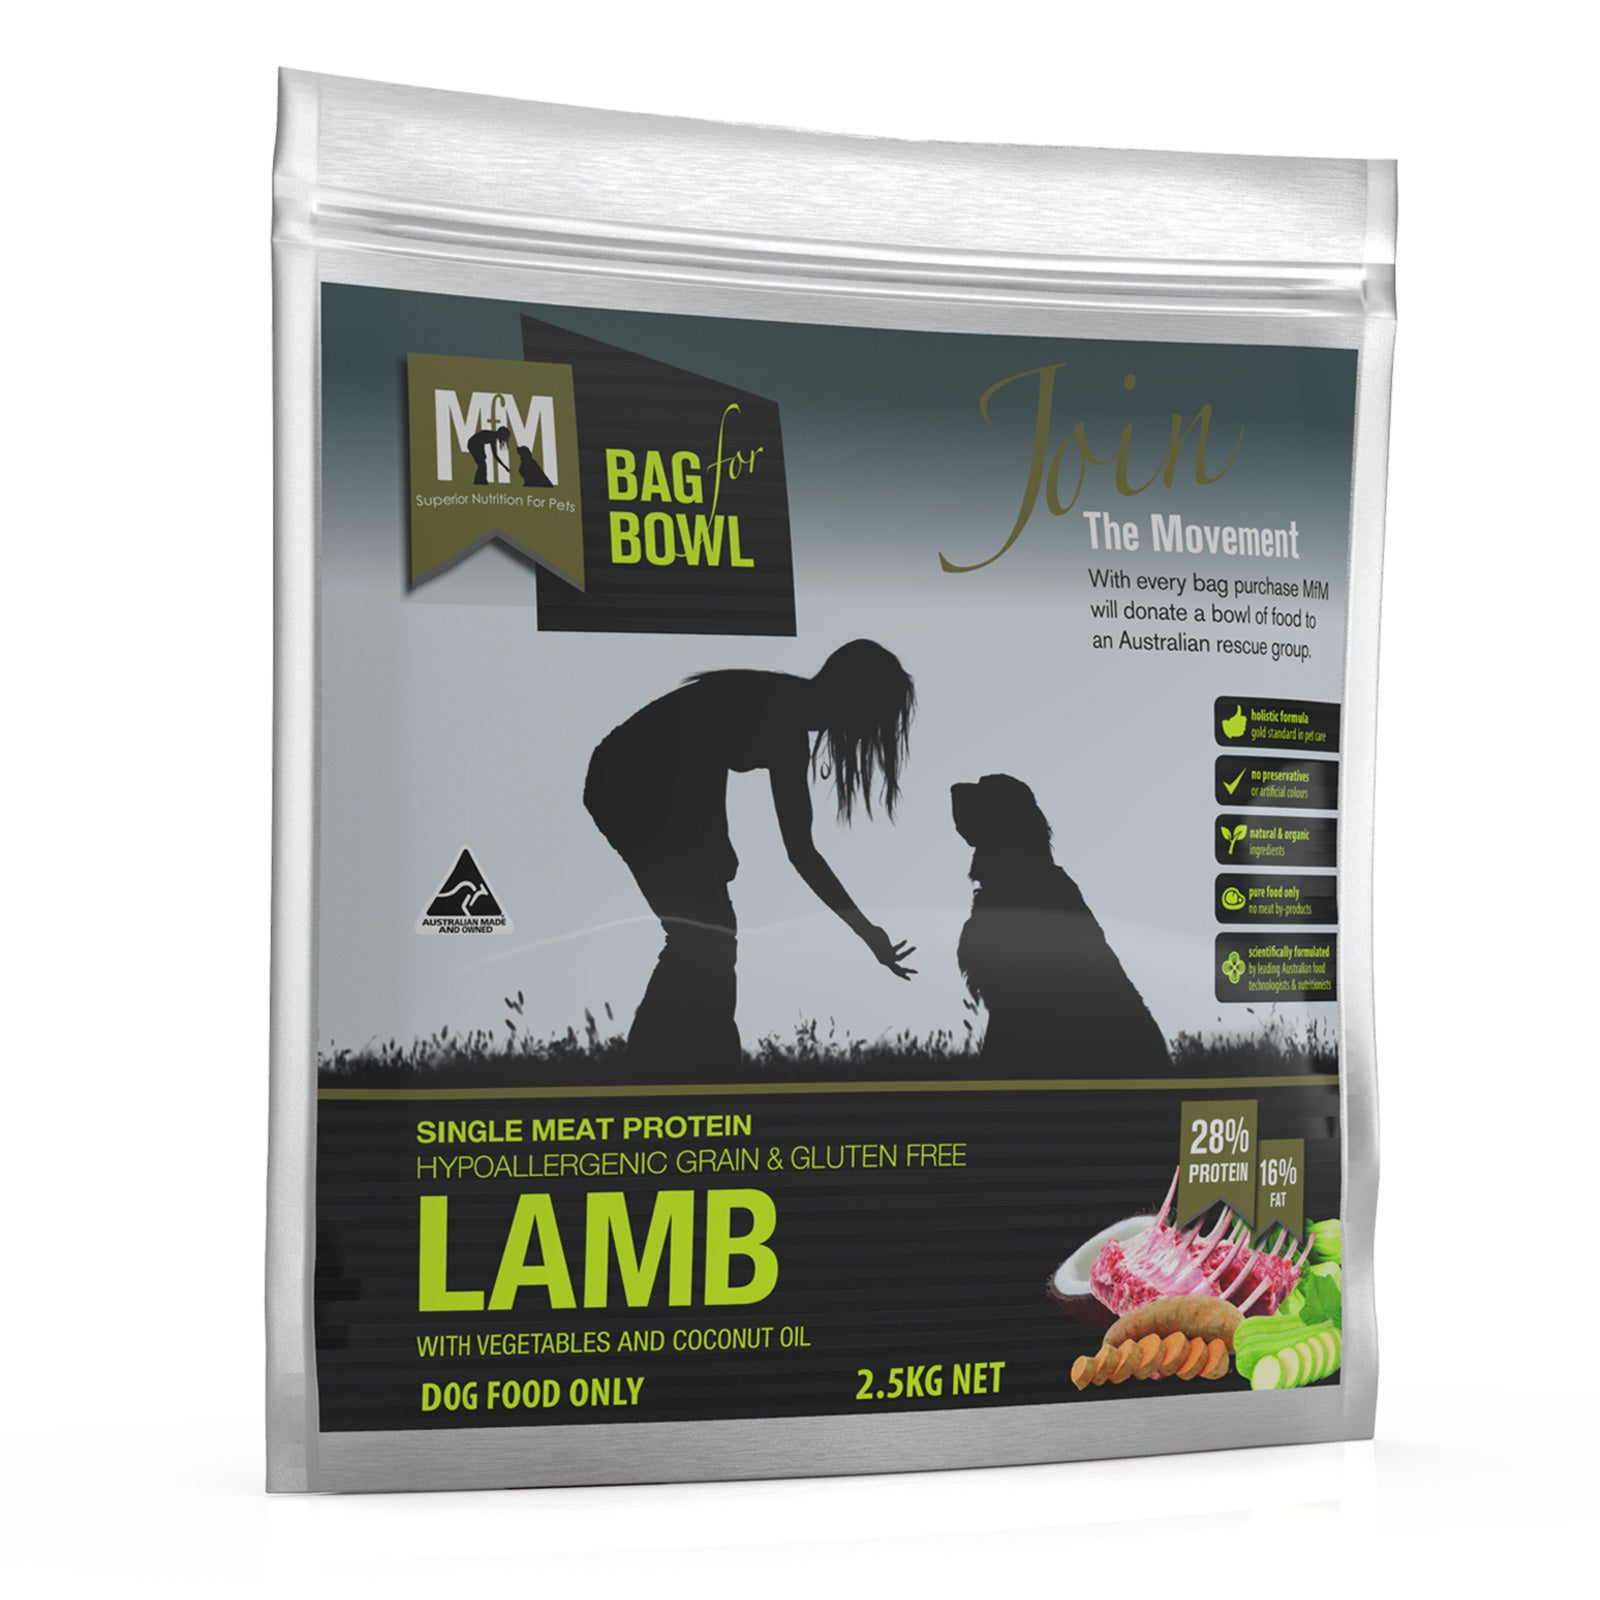 Meals for Mutts 2.5kg Lamb Single Protein Grain Free Adult Dog Dry Food (MFM)